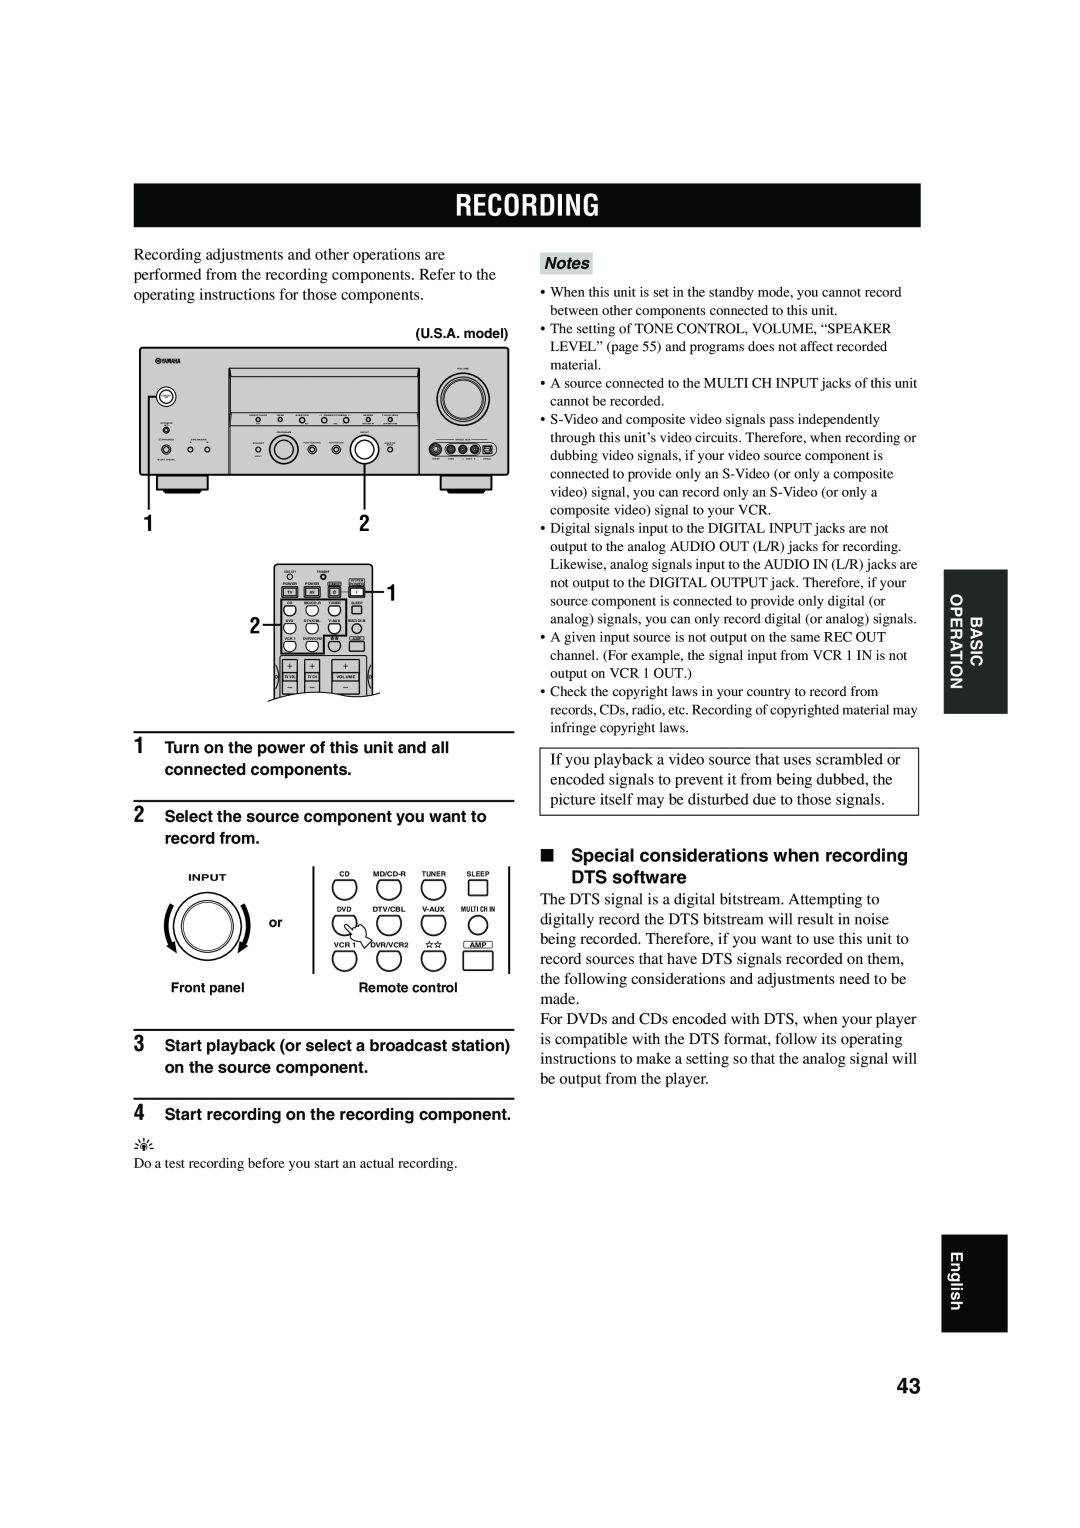 Yamaha HTR-5760 owner manual Recording, Special considerations when recording, DTS software 